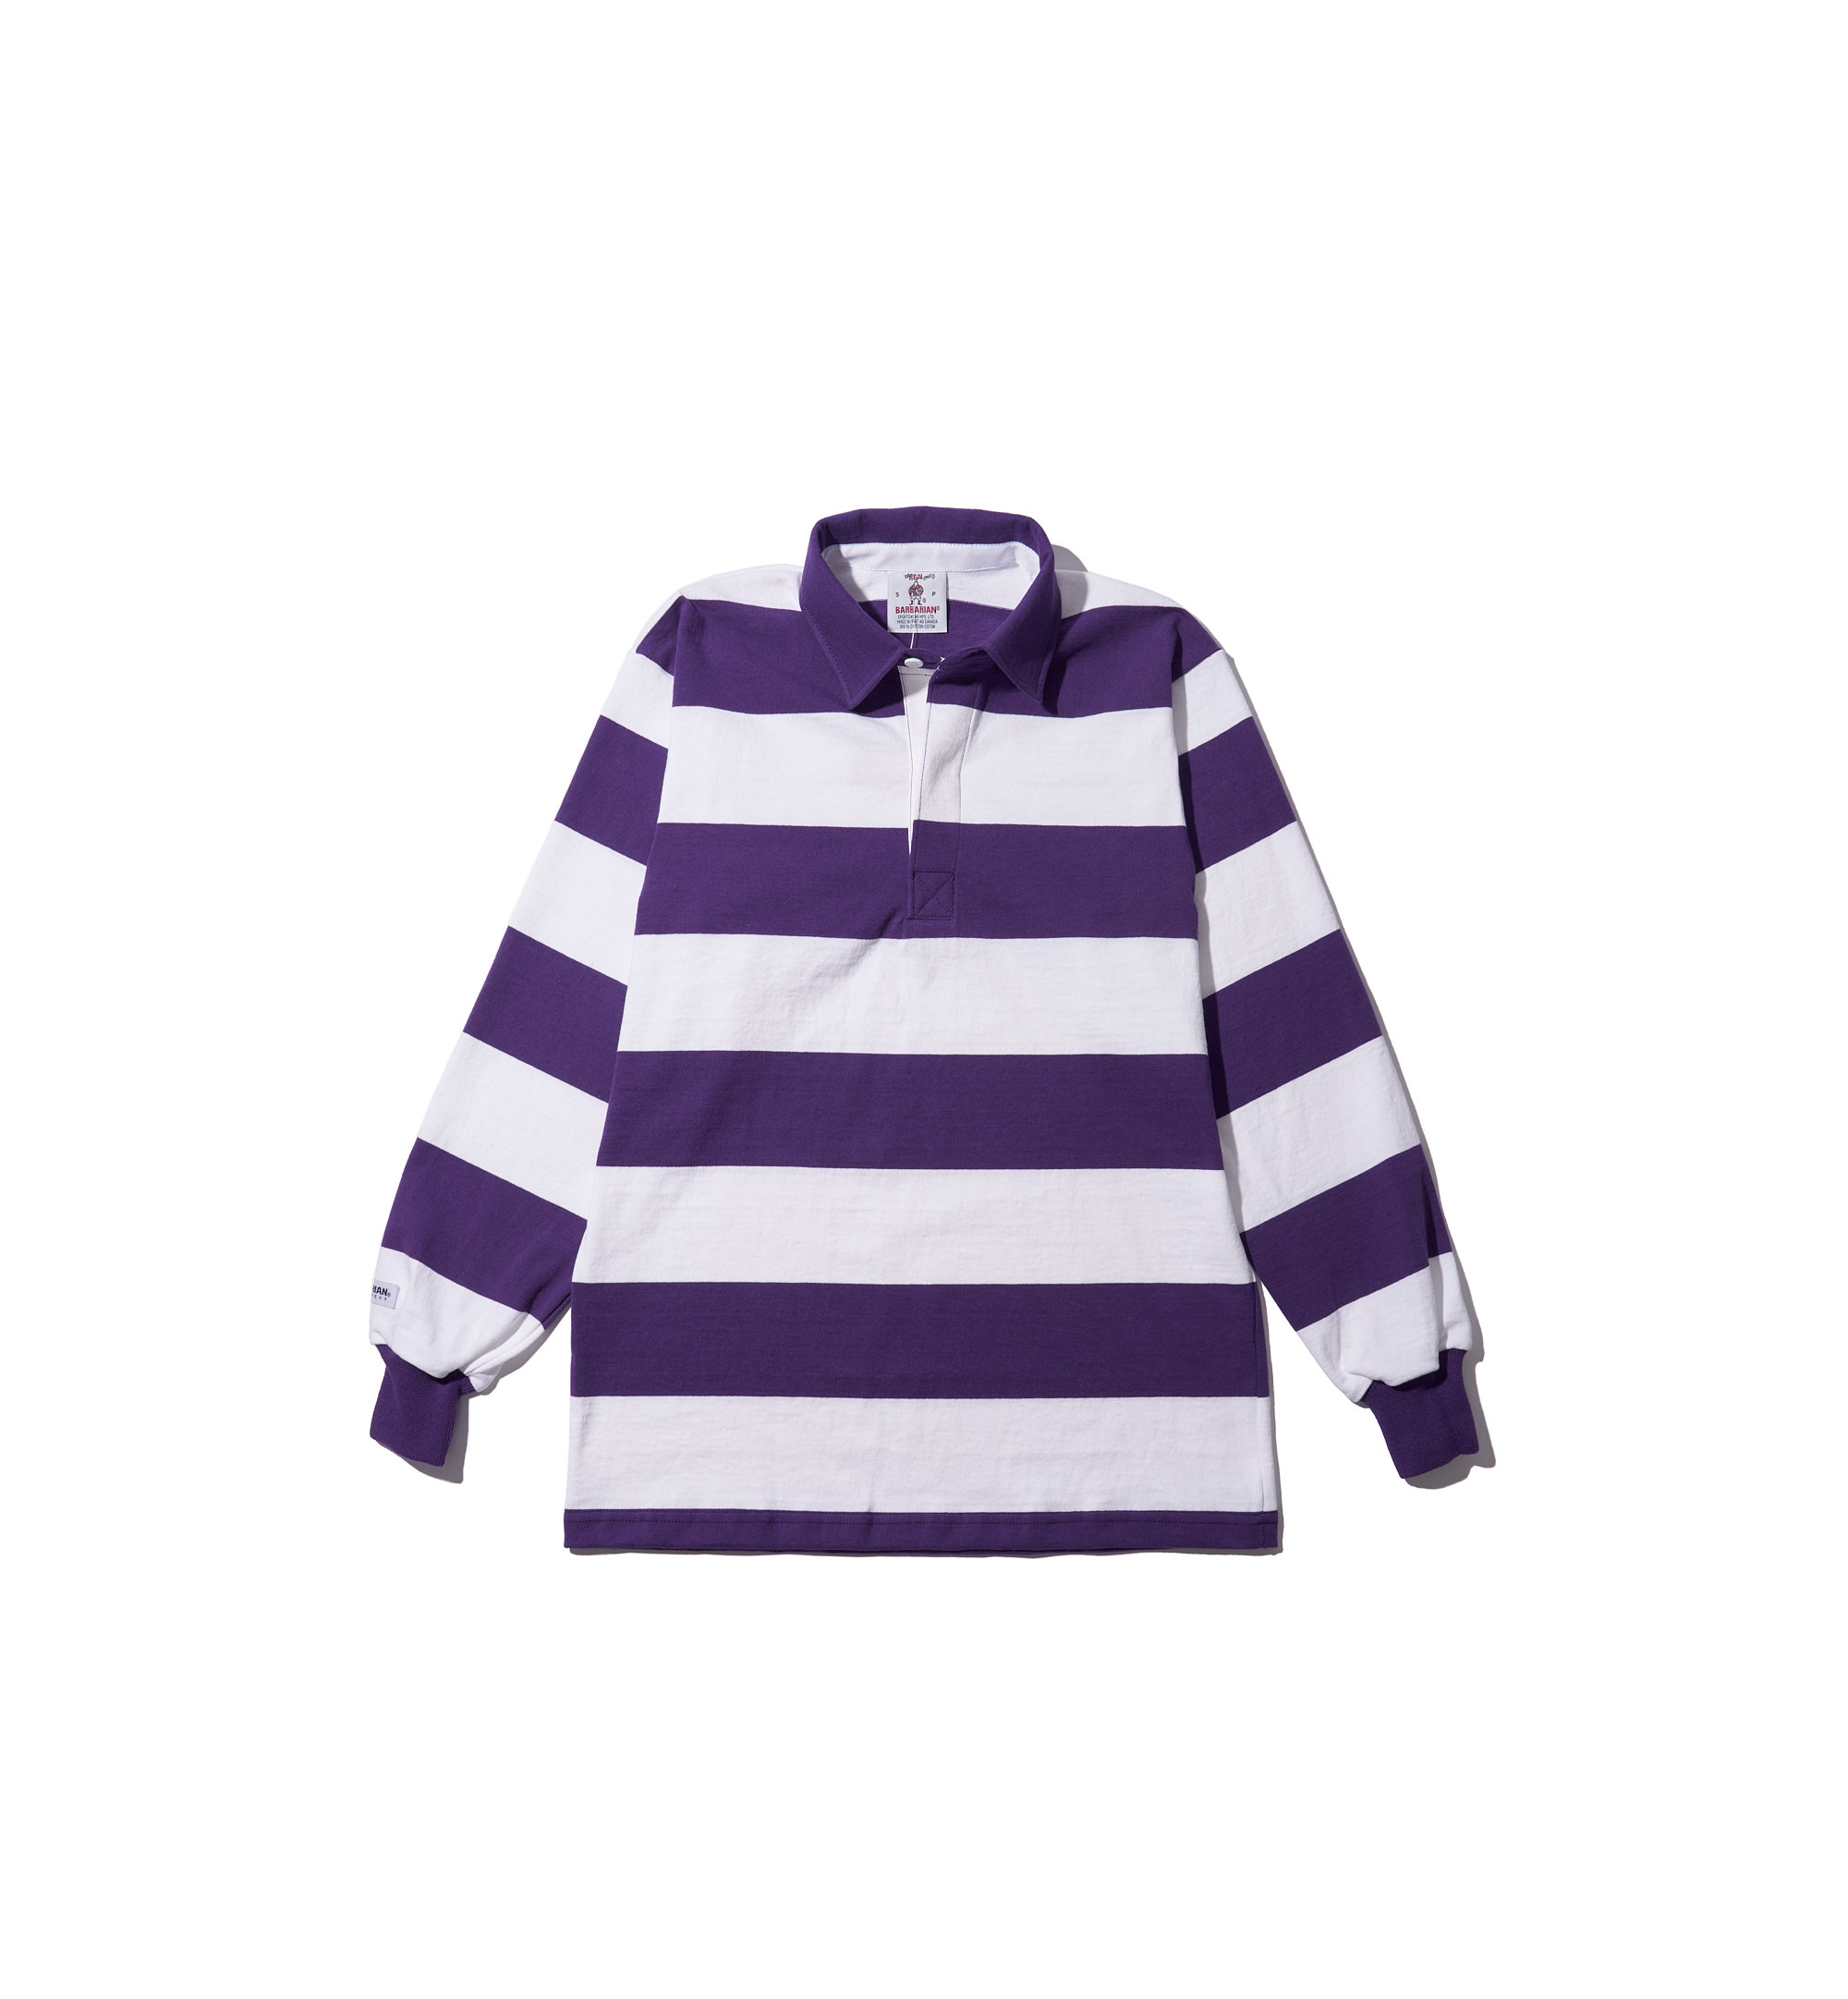 Casual Rugby Jersey Purple/White